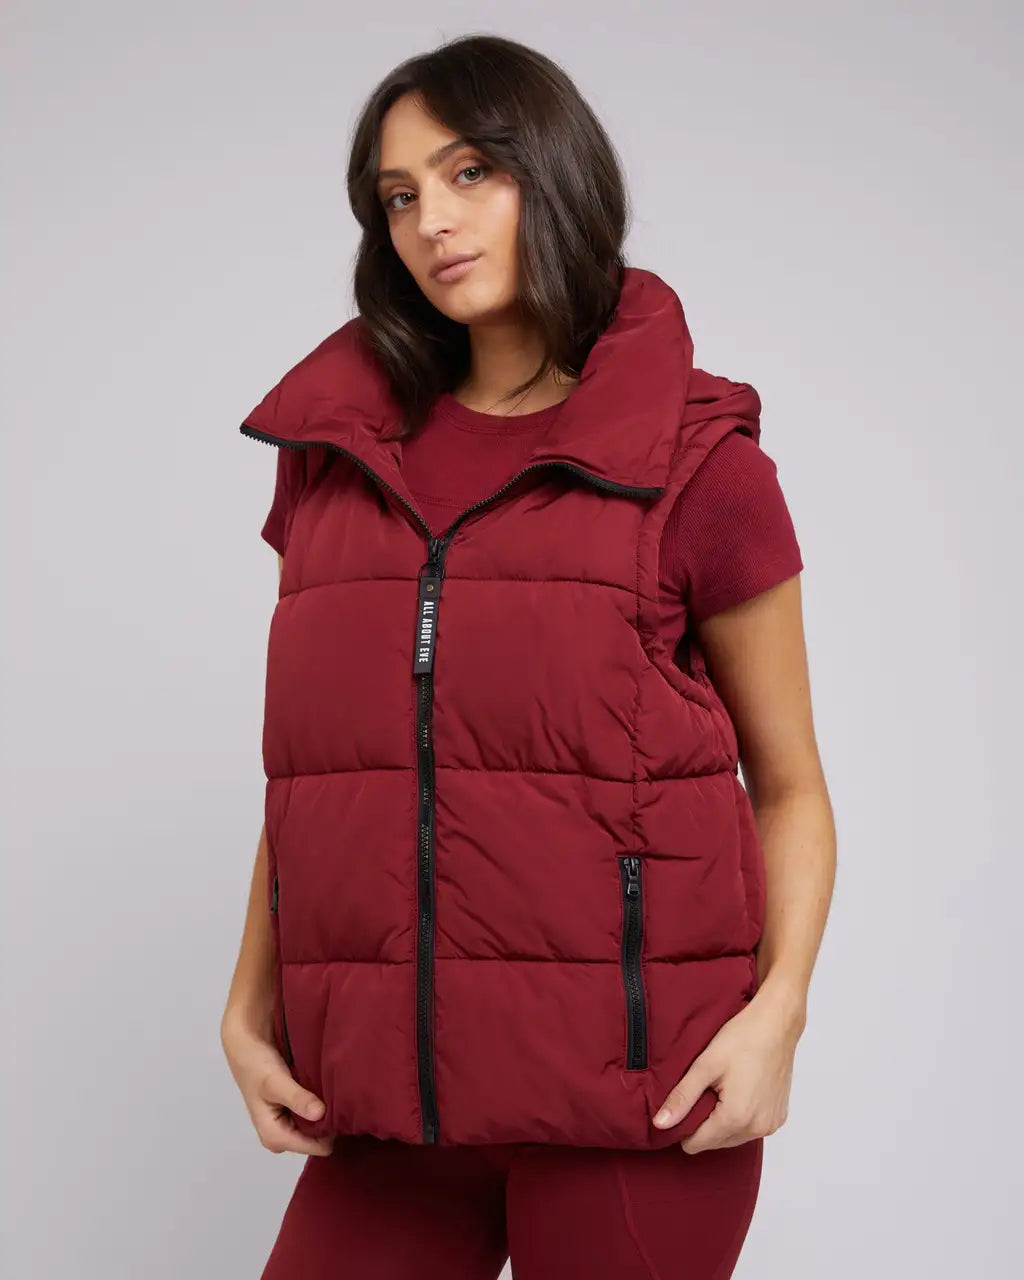 REMI LUXE PUFFER VEST